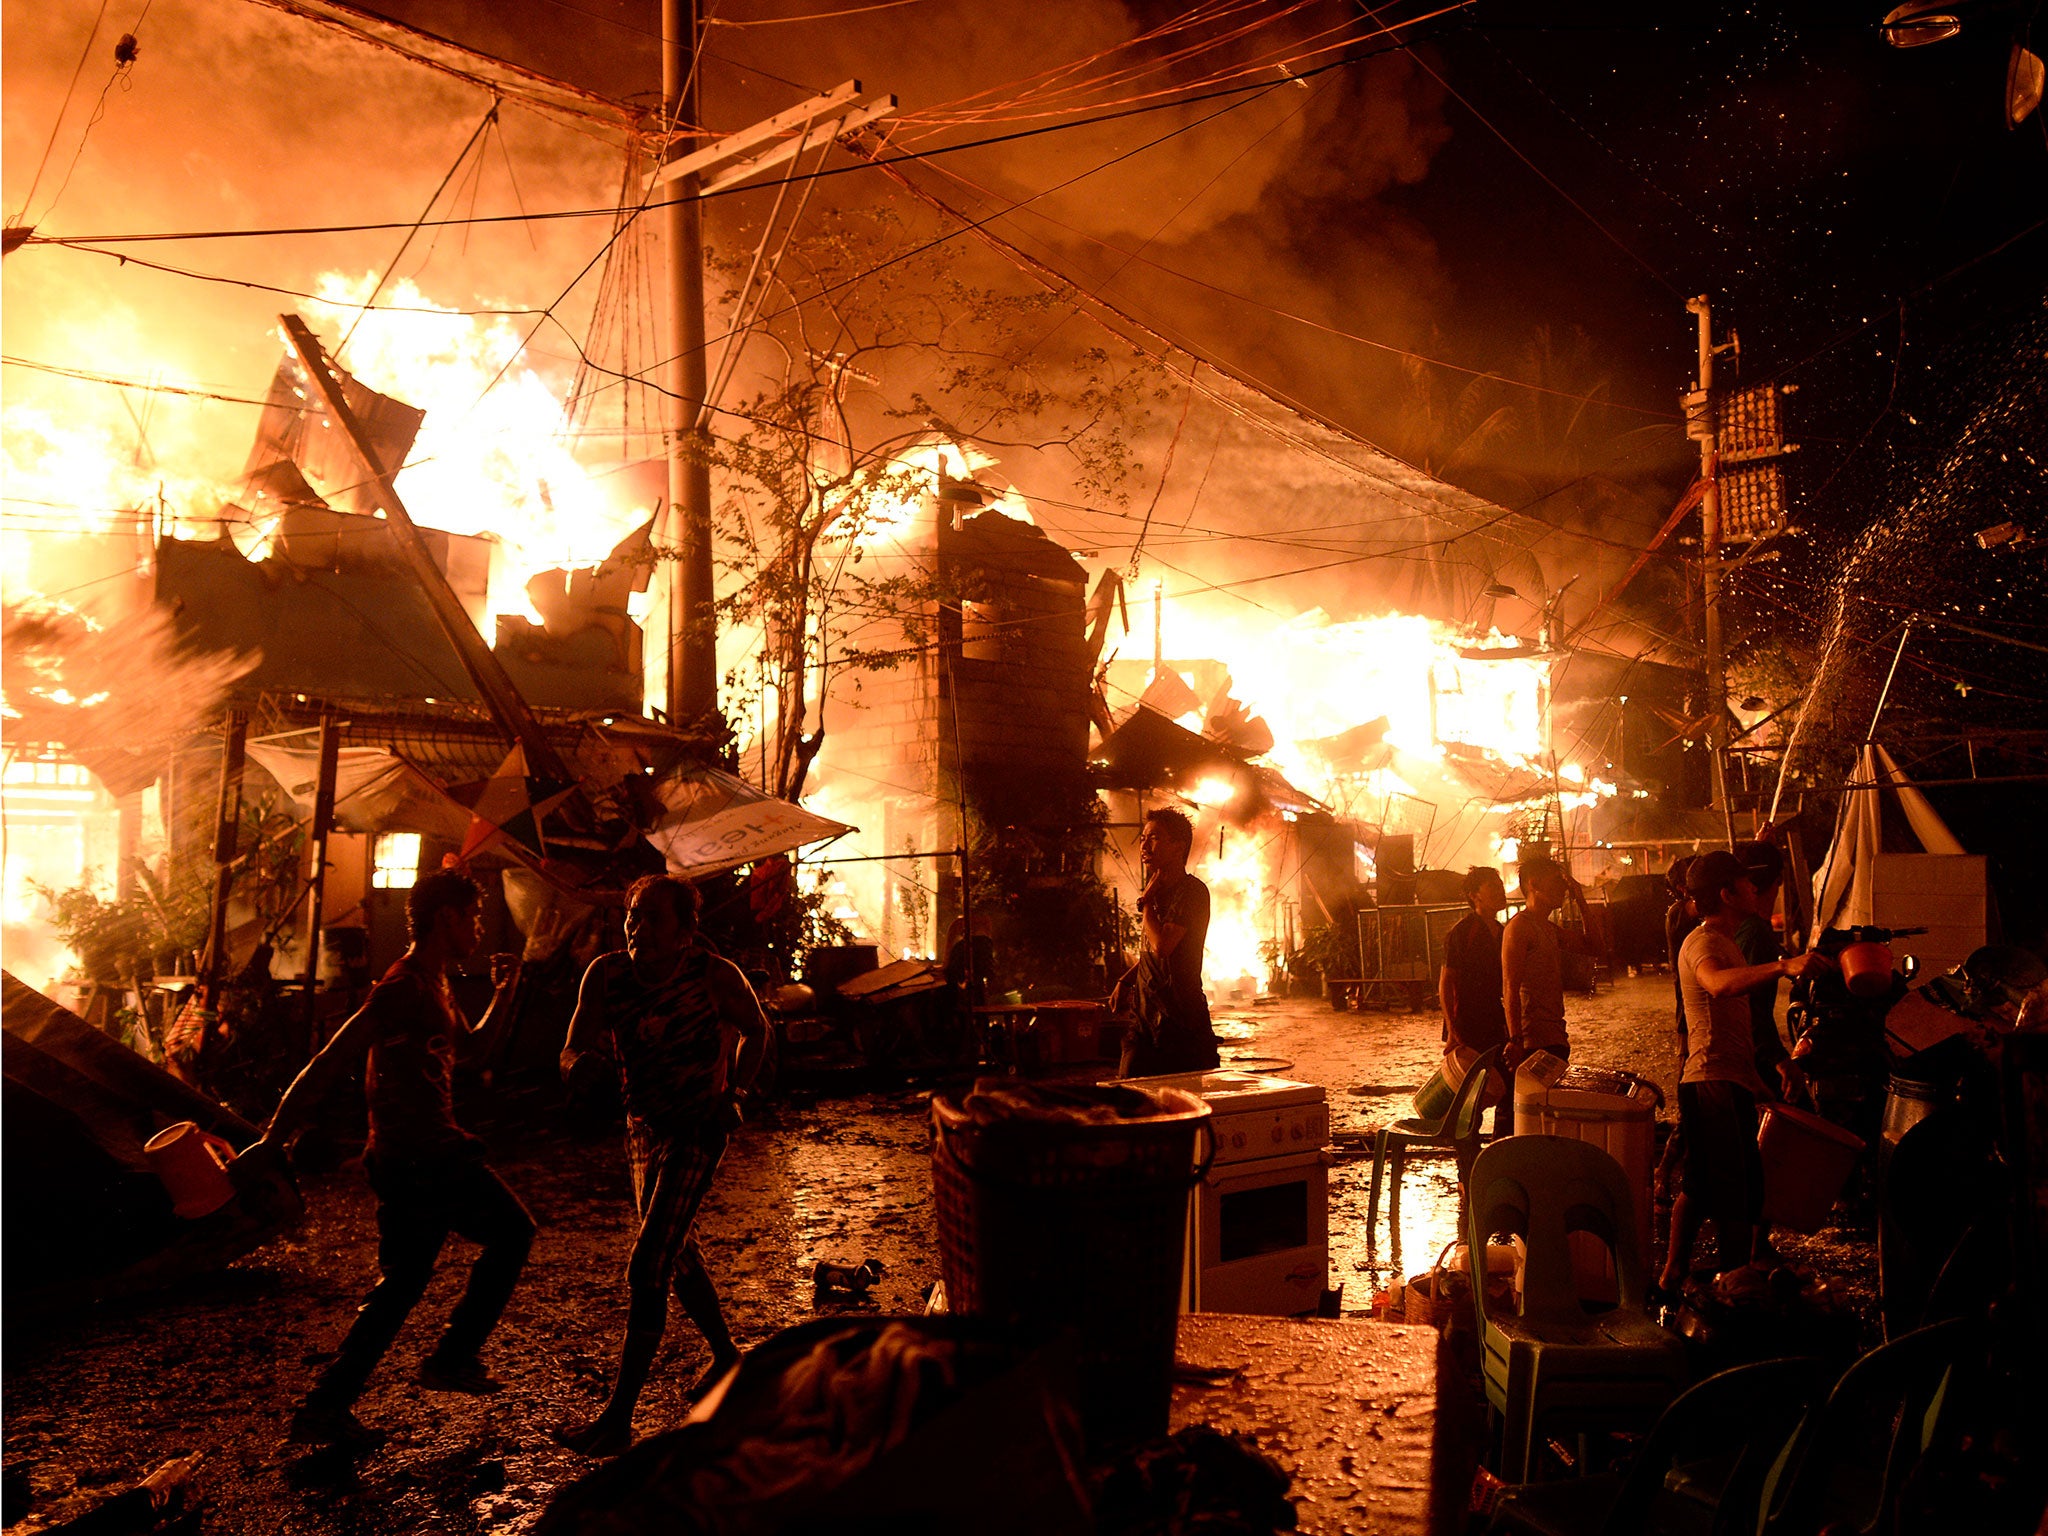 Local residents use water to try to fight a huge fire that razed a slum area in Manila on 1 January, 2016. Nearly 300 homes were destroyed in the early New Year's Day fire, according to local media reports